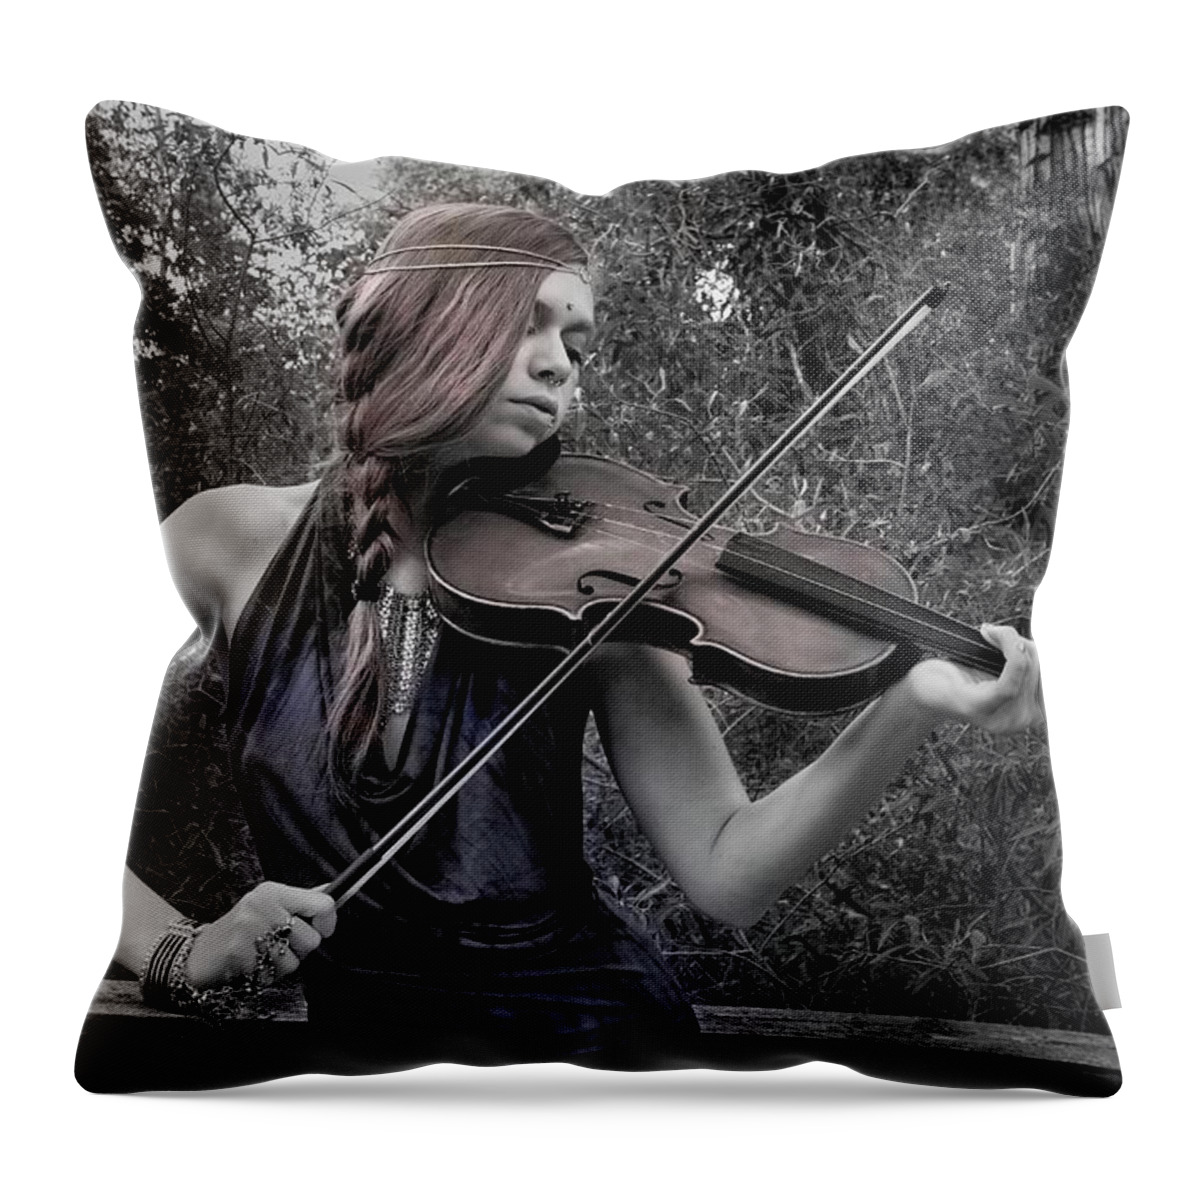 Photograph Throw Pillow featuring the photograph Gypsy Player II by Ron Cline